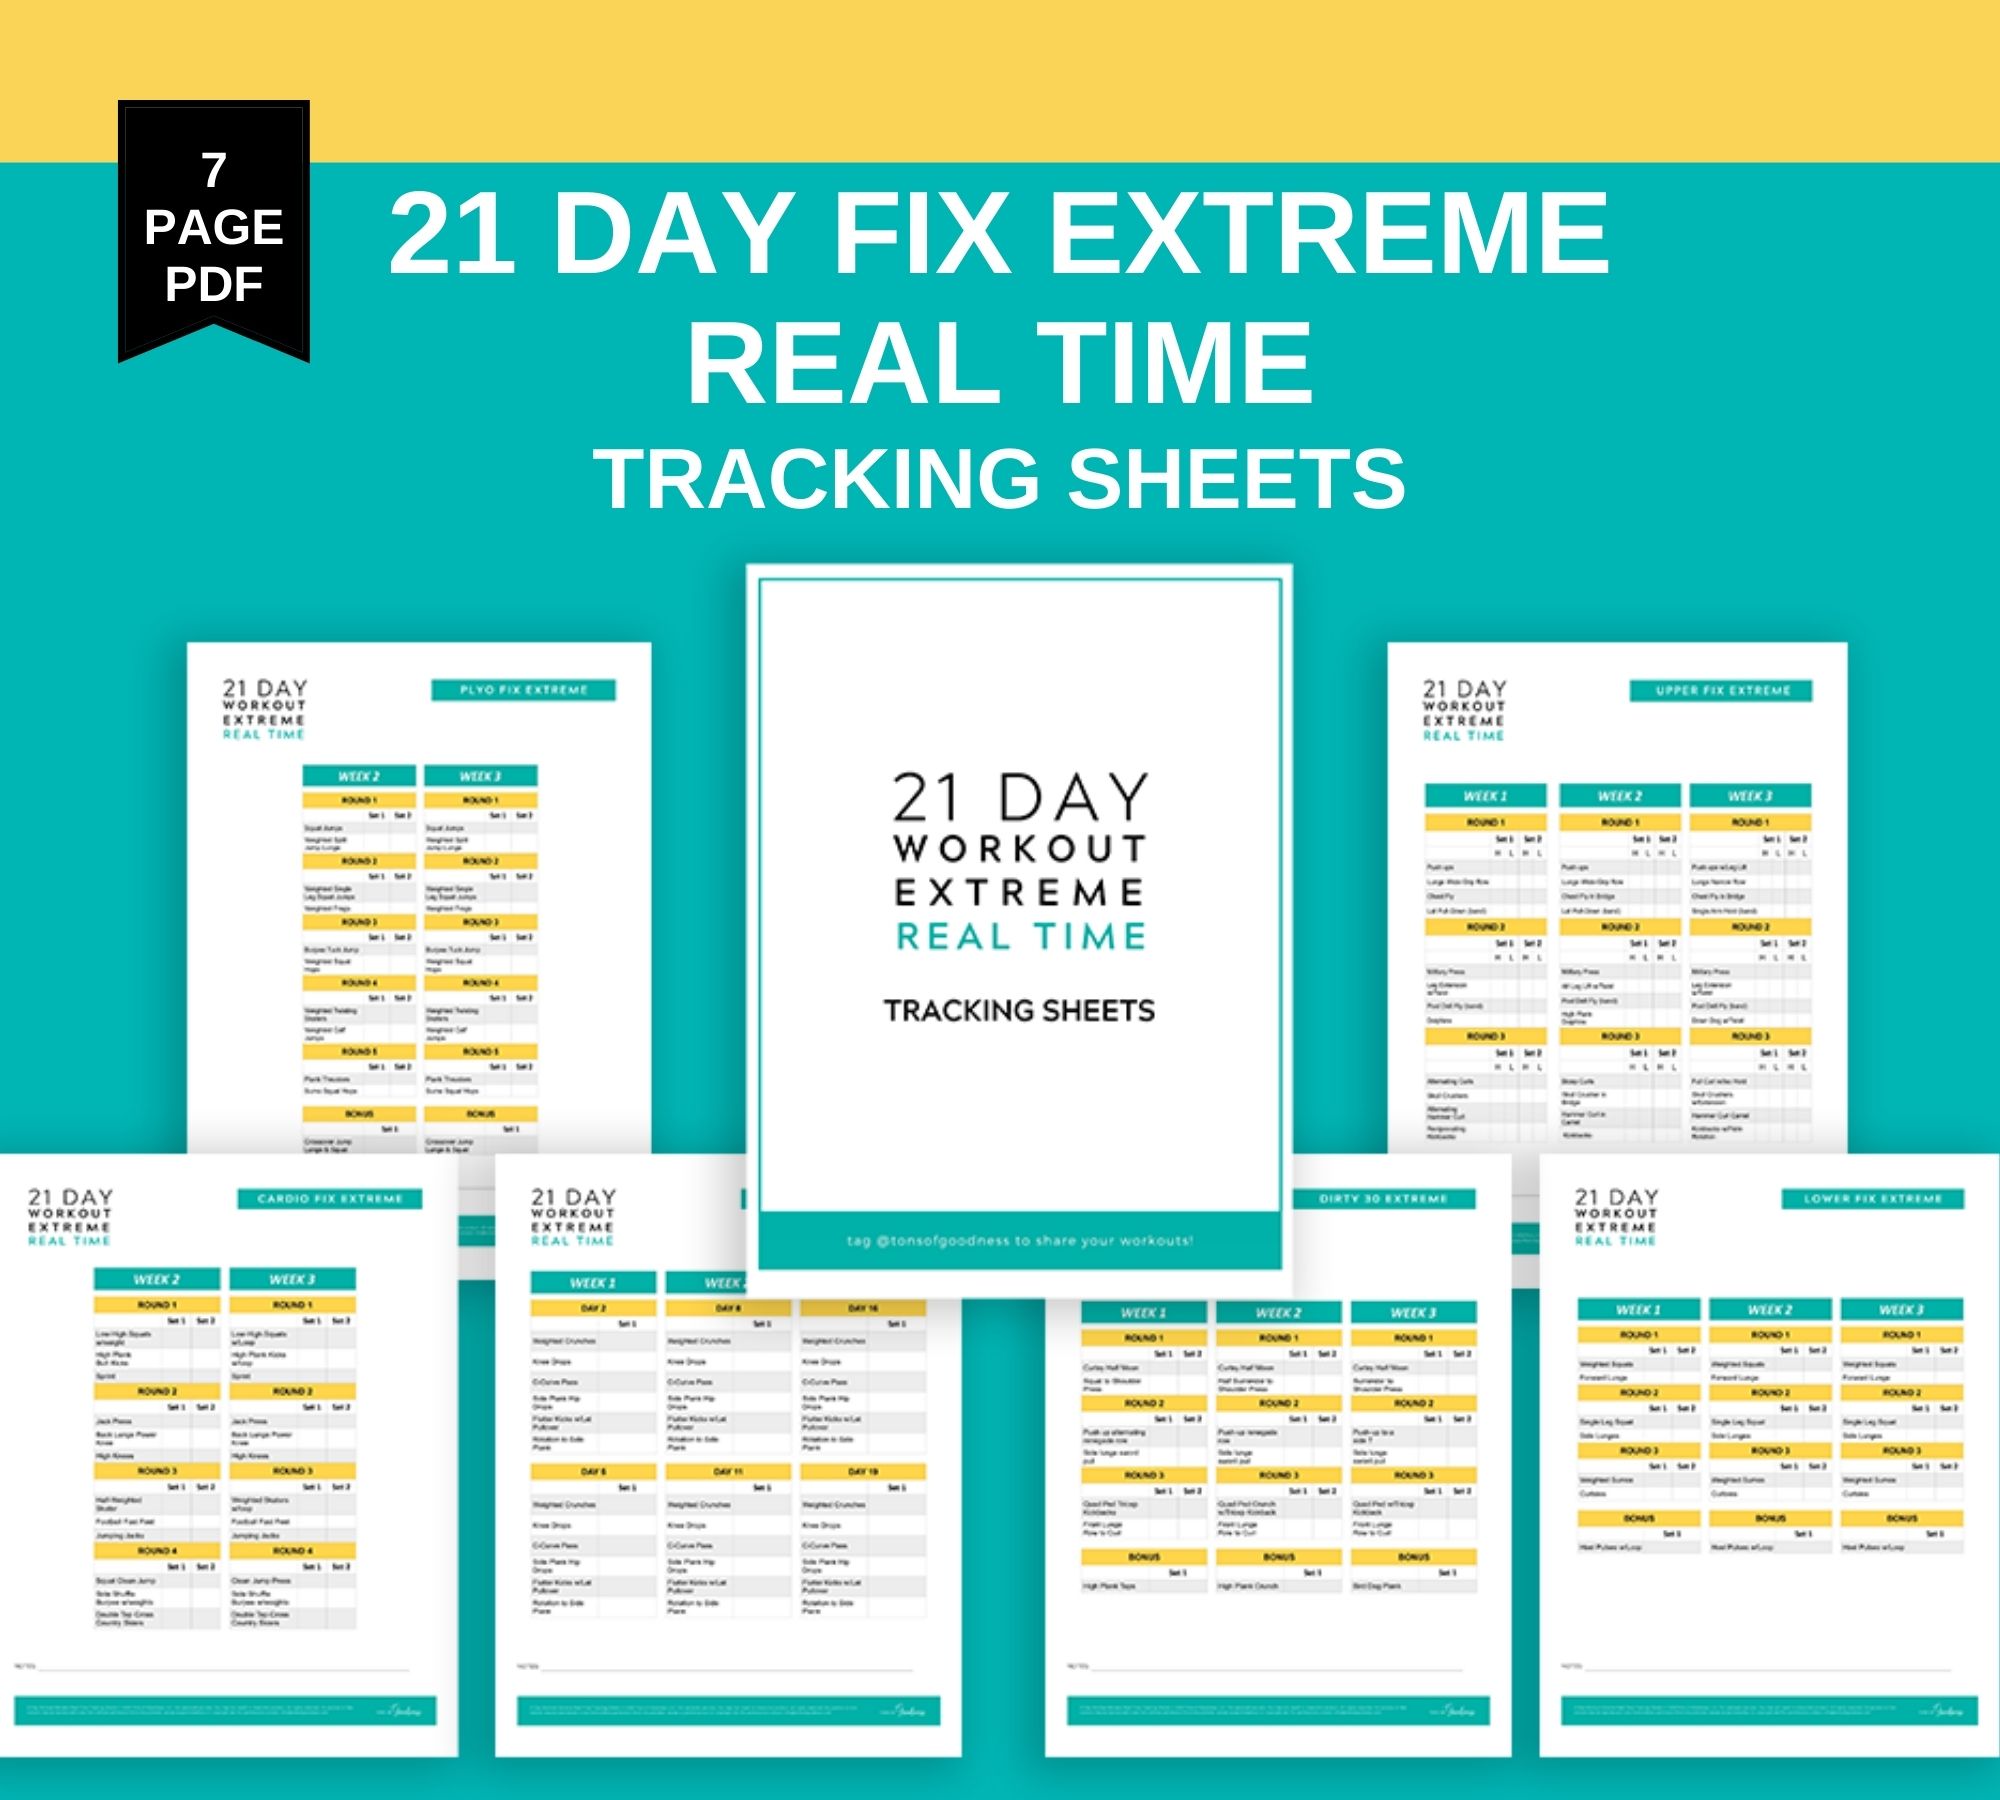 21 day fix extreme